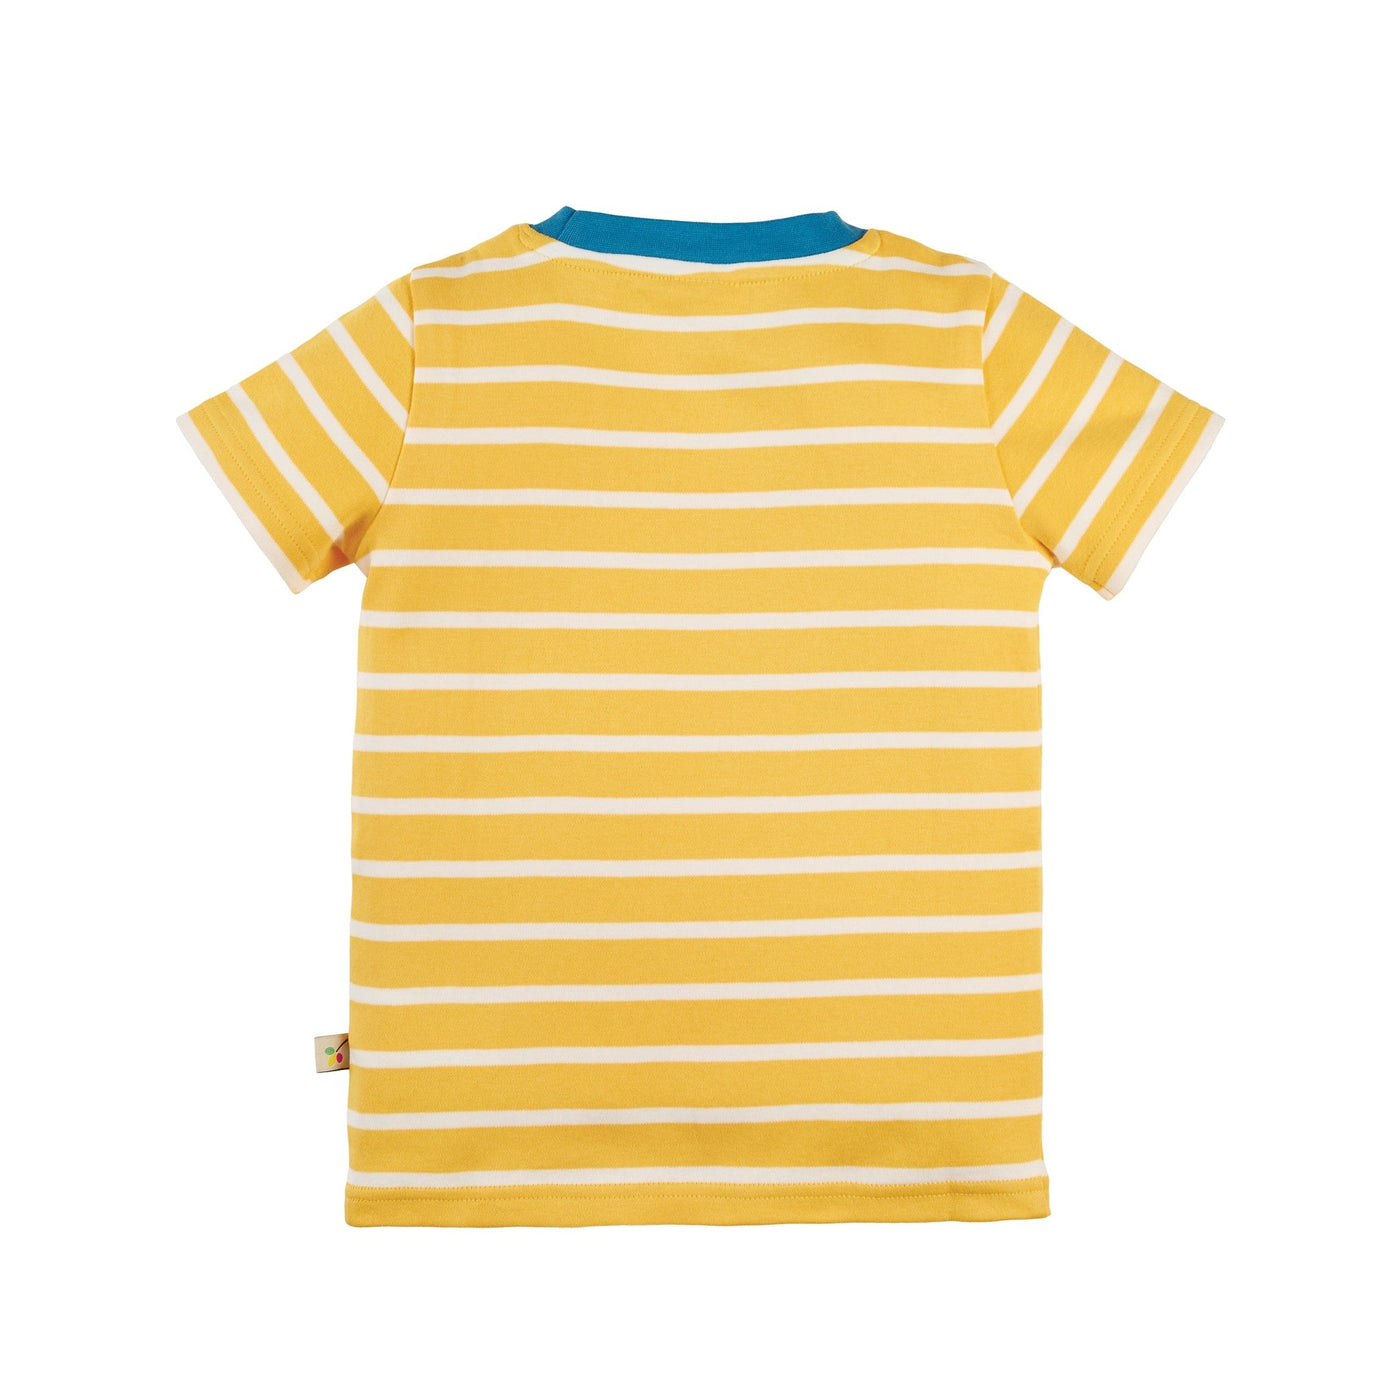 The National Trust Sid Applique TShirt - Puffin by Frugi